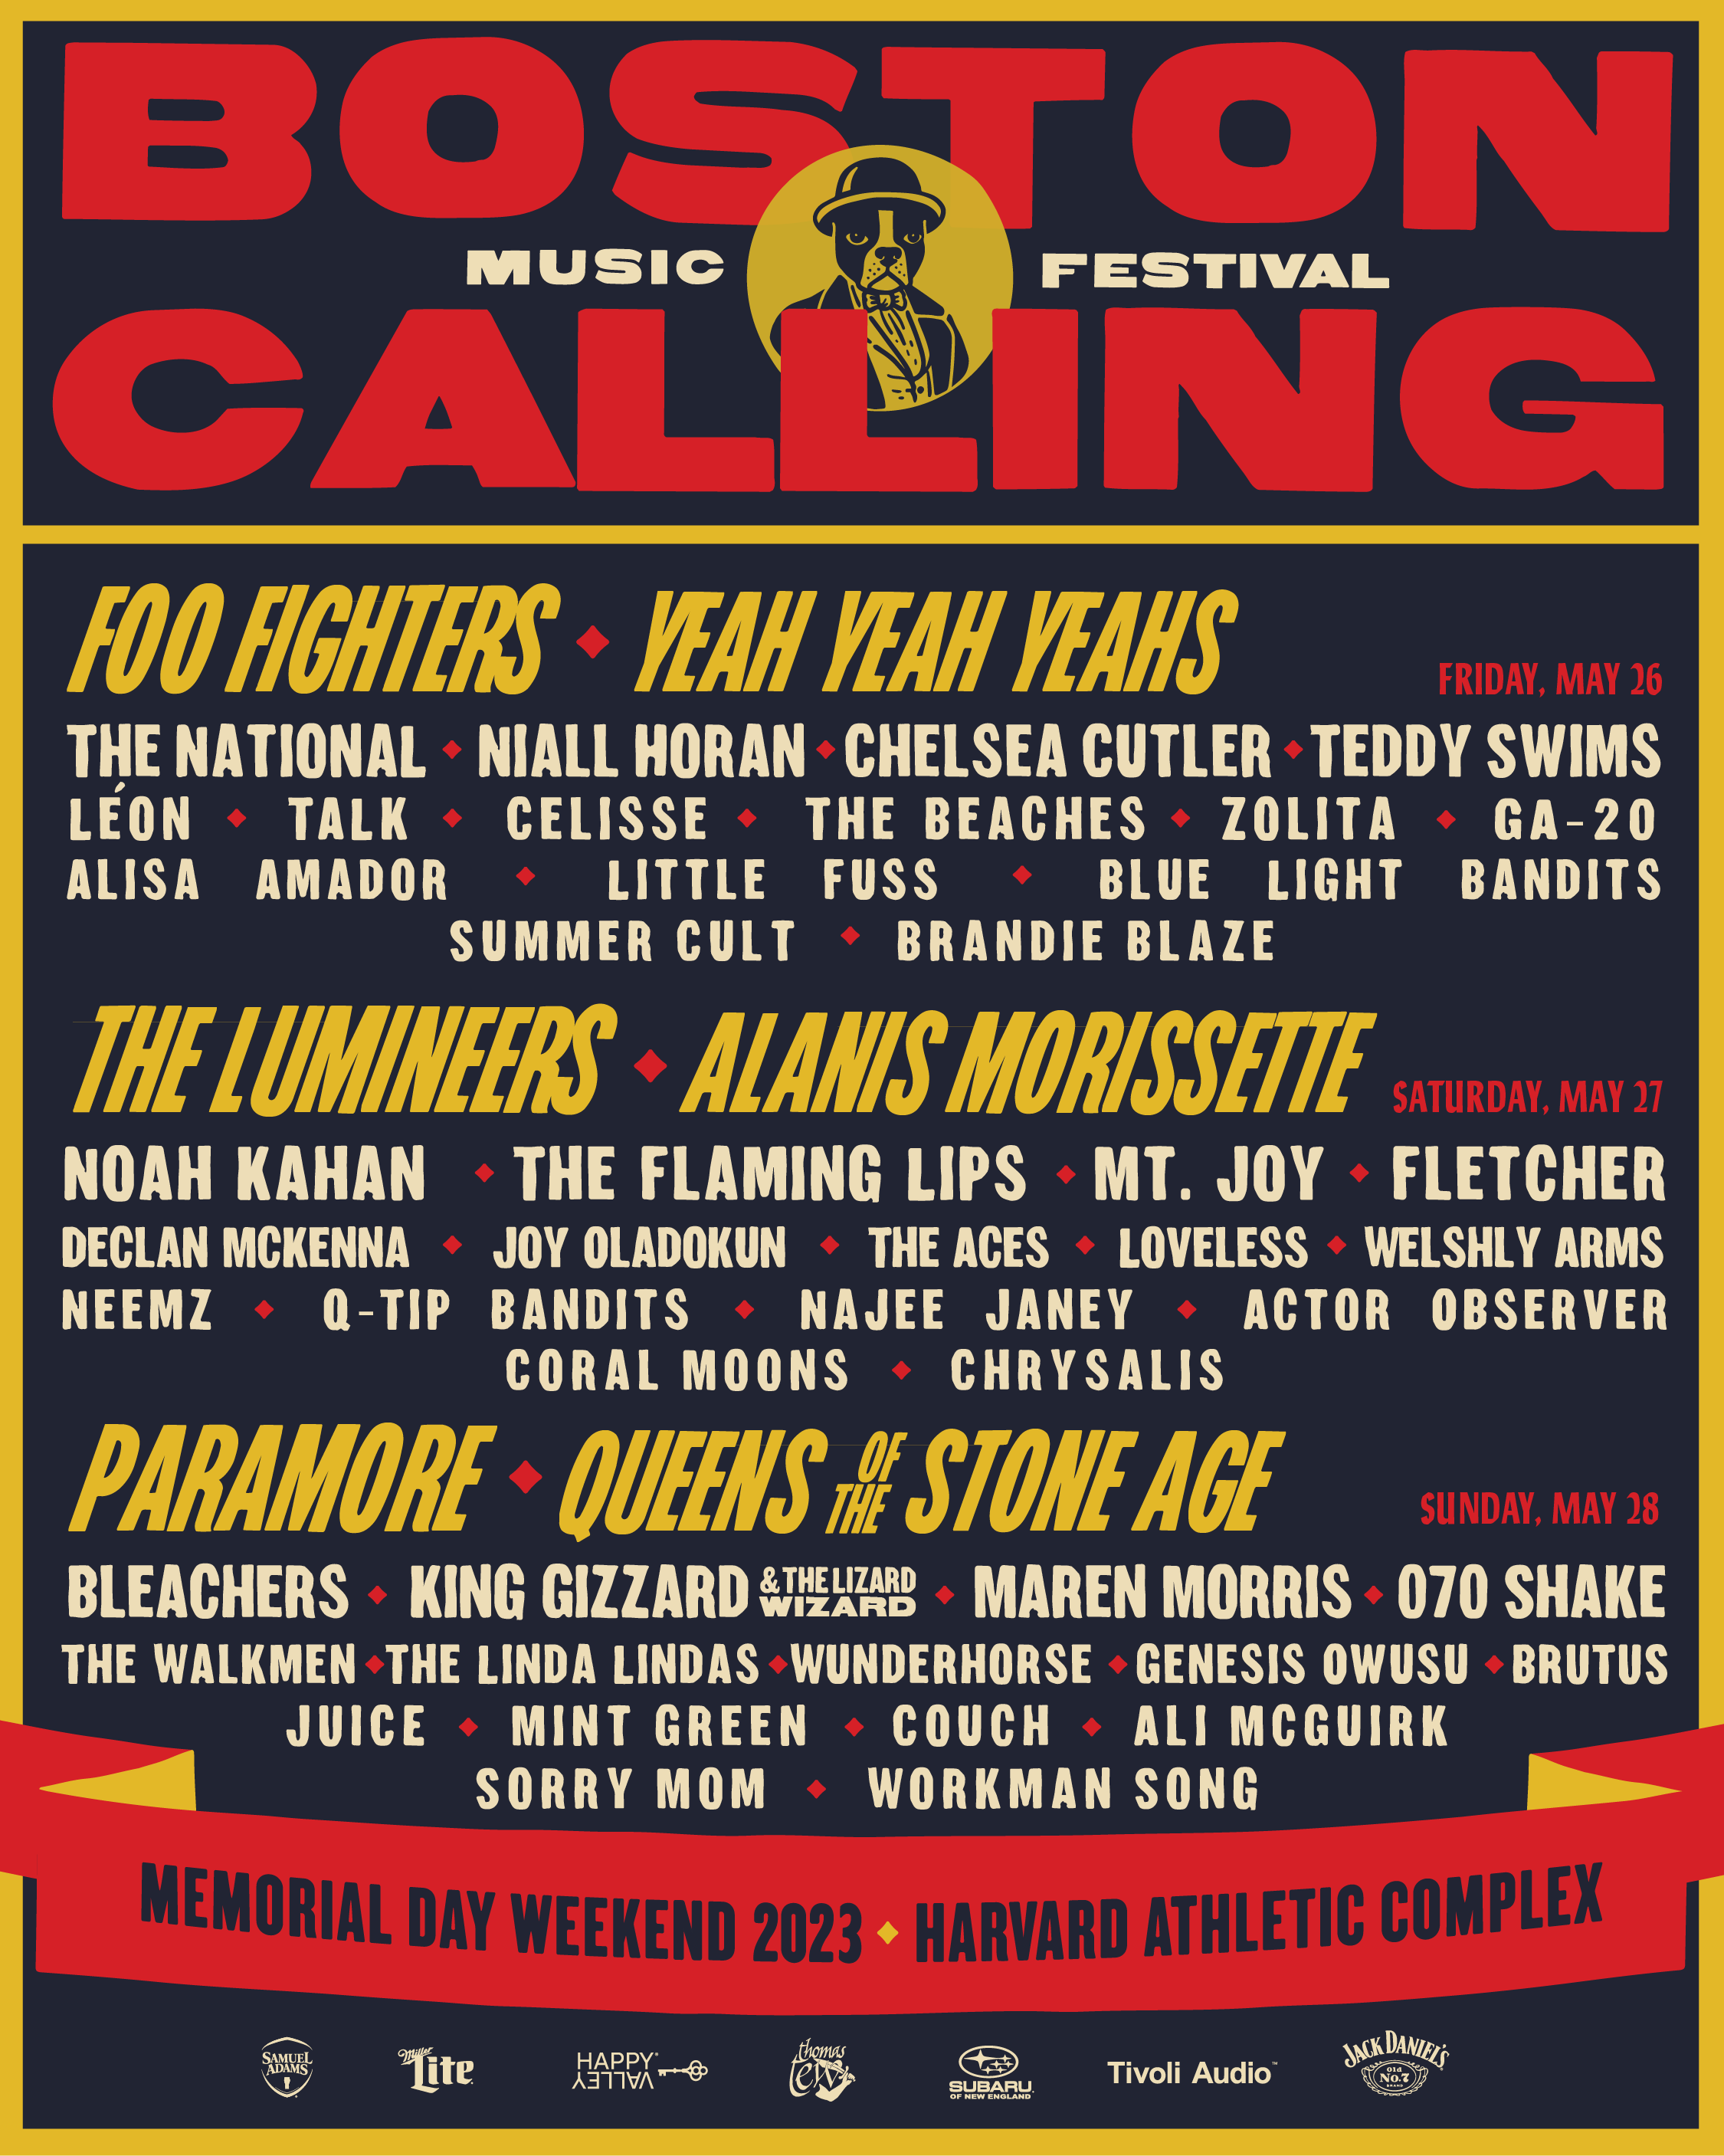 Boston Calling 2023 lineup Foo Fighters, Lumineers, Paramore, more